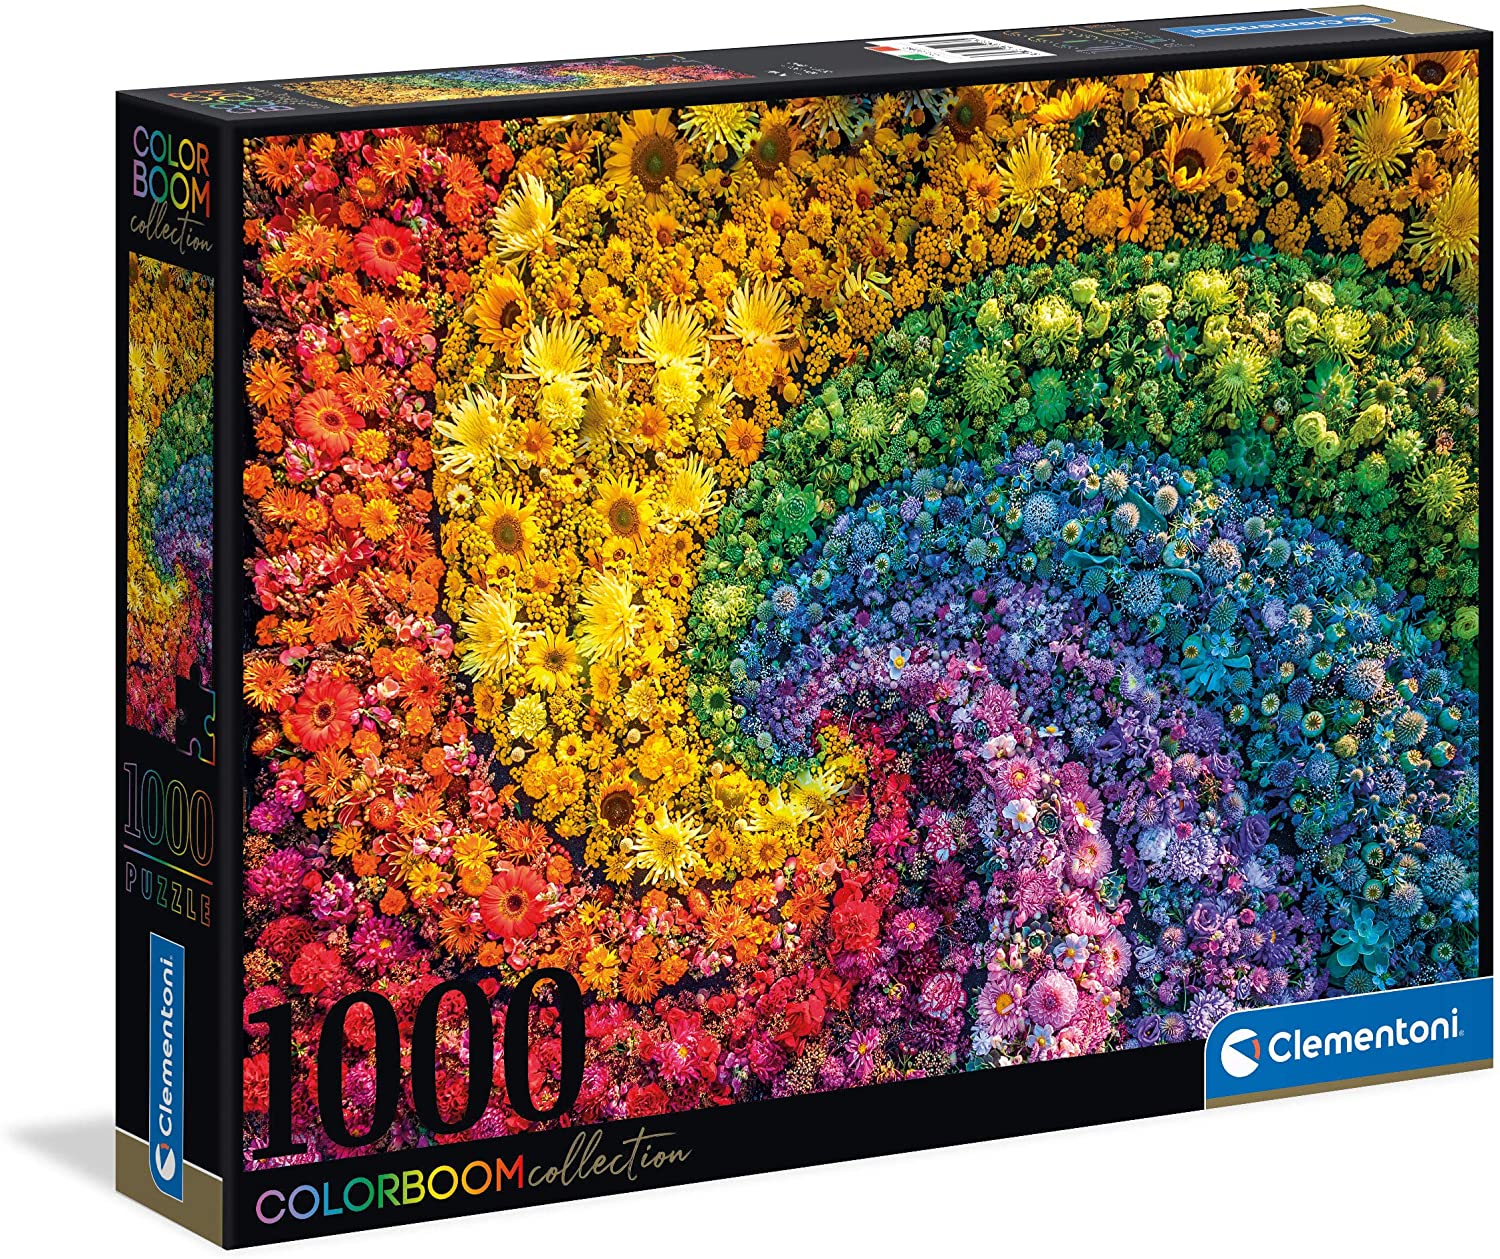 Science Museum 'Space' (Impossible Puzzle) - Clementoni - 1000 pieces  (review in comments) : r/Jigsawpuzzles